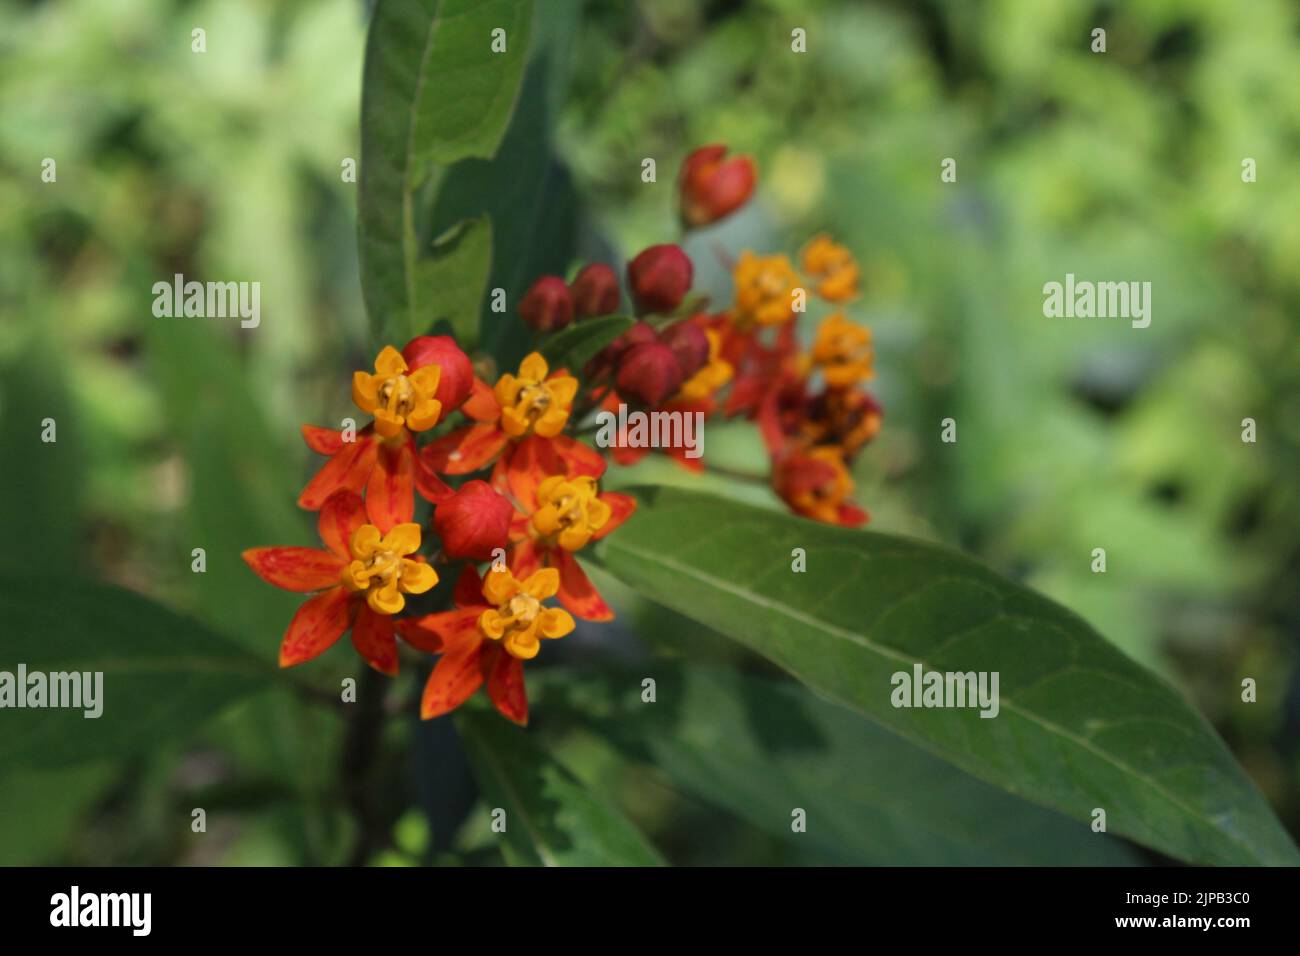 Flowers of tropical milkweed plant blood flower (Asclepias curassavica) Stock Photo